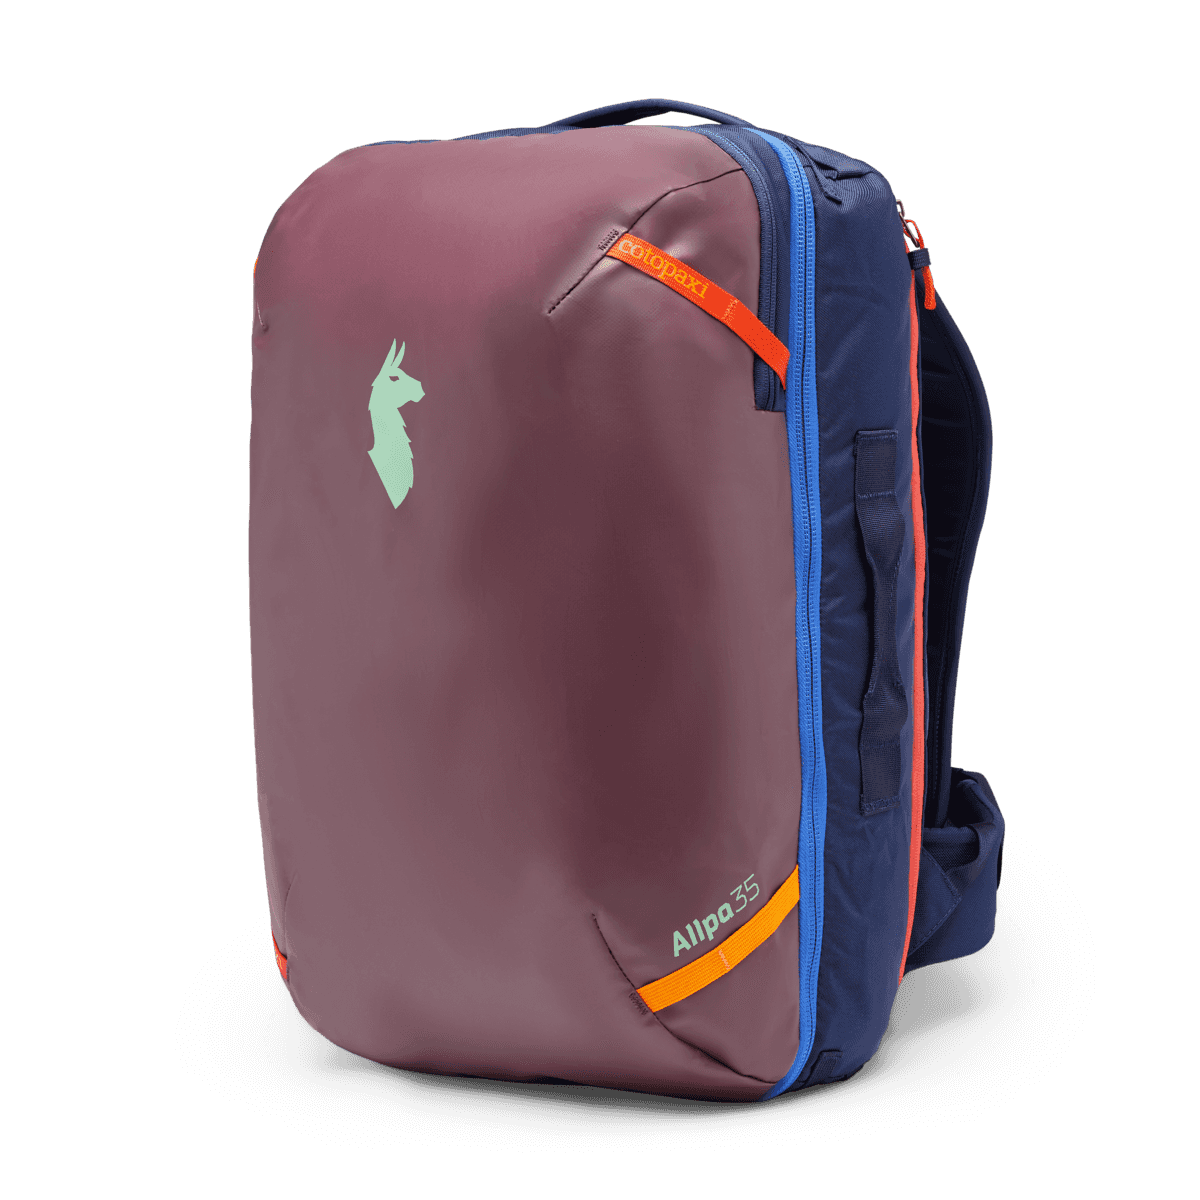 Cotopaxi Allpa 35L Travel Pack in Wine